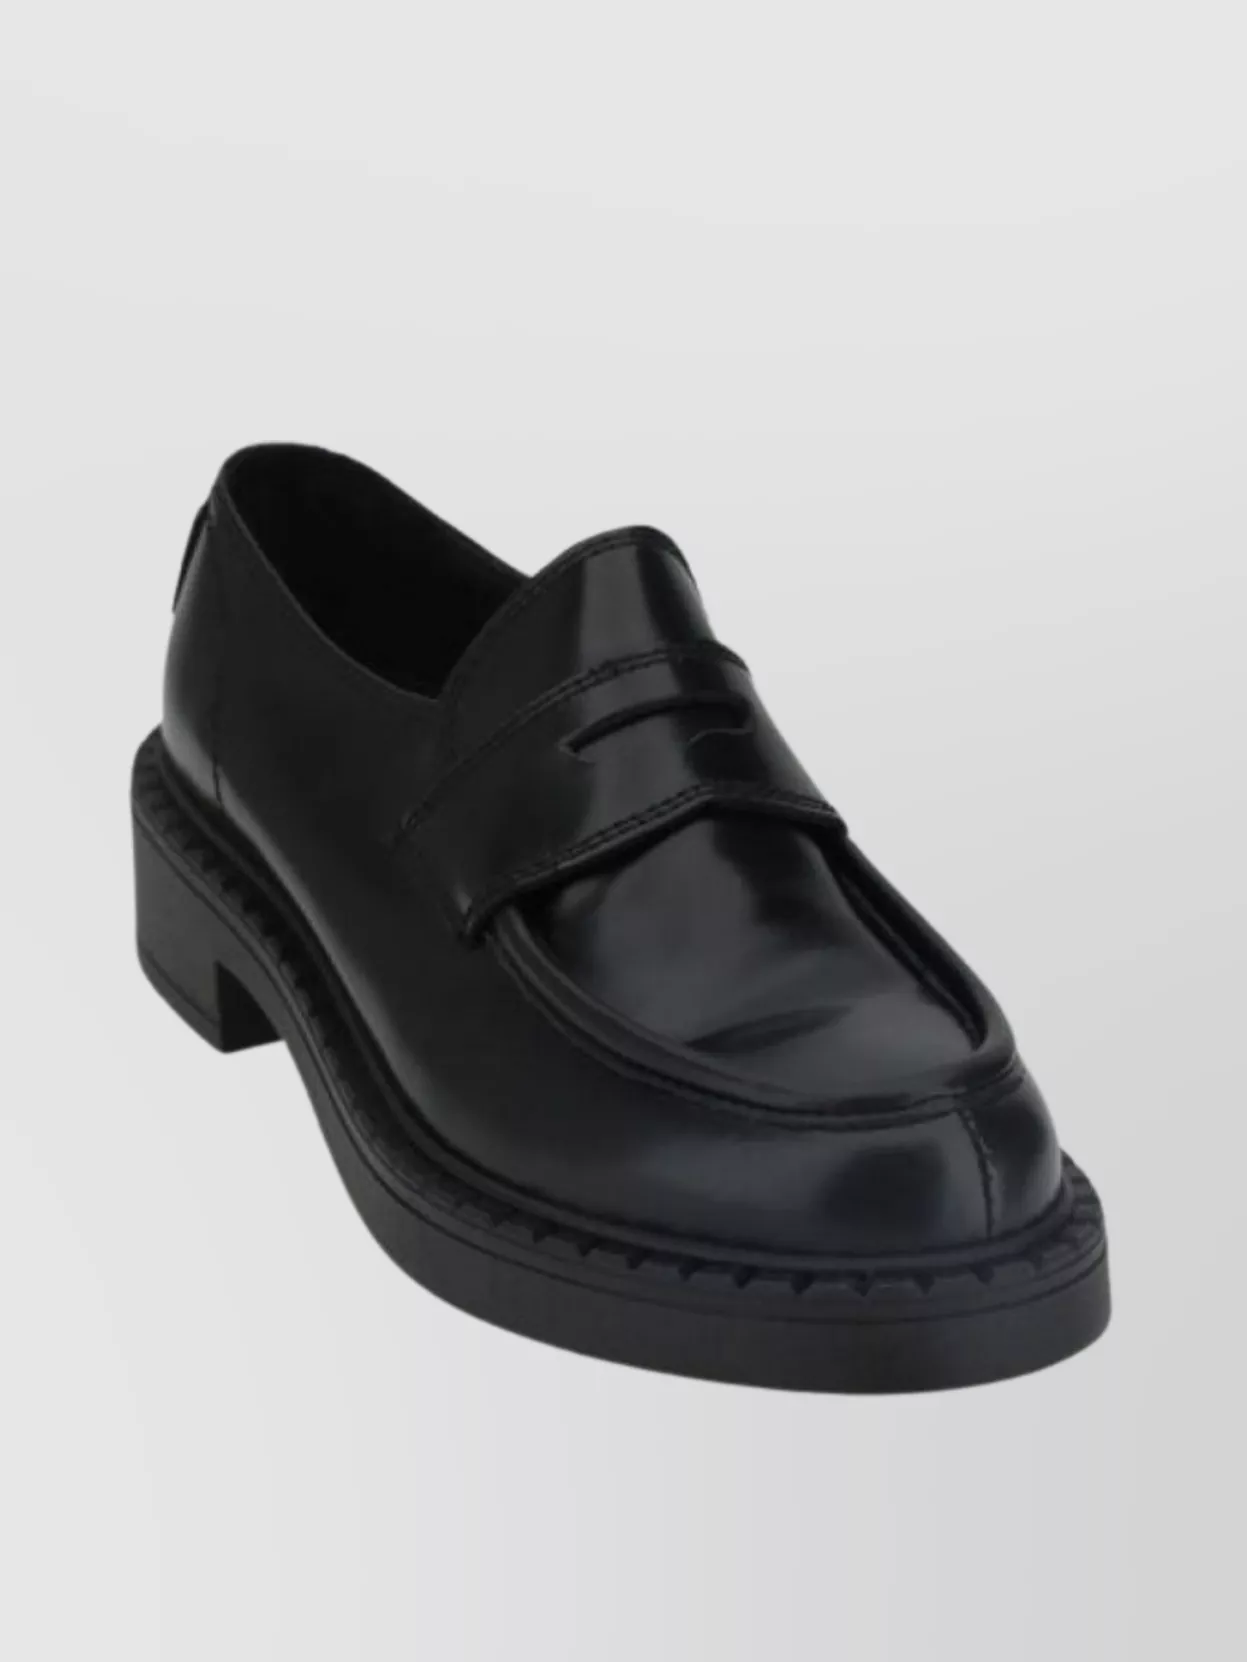 Shop Gh Bass Chunky Sole Penny Loafer Round Toe